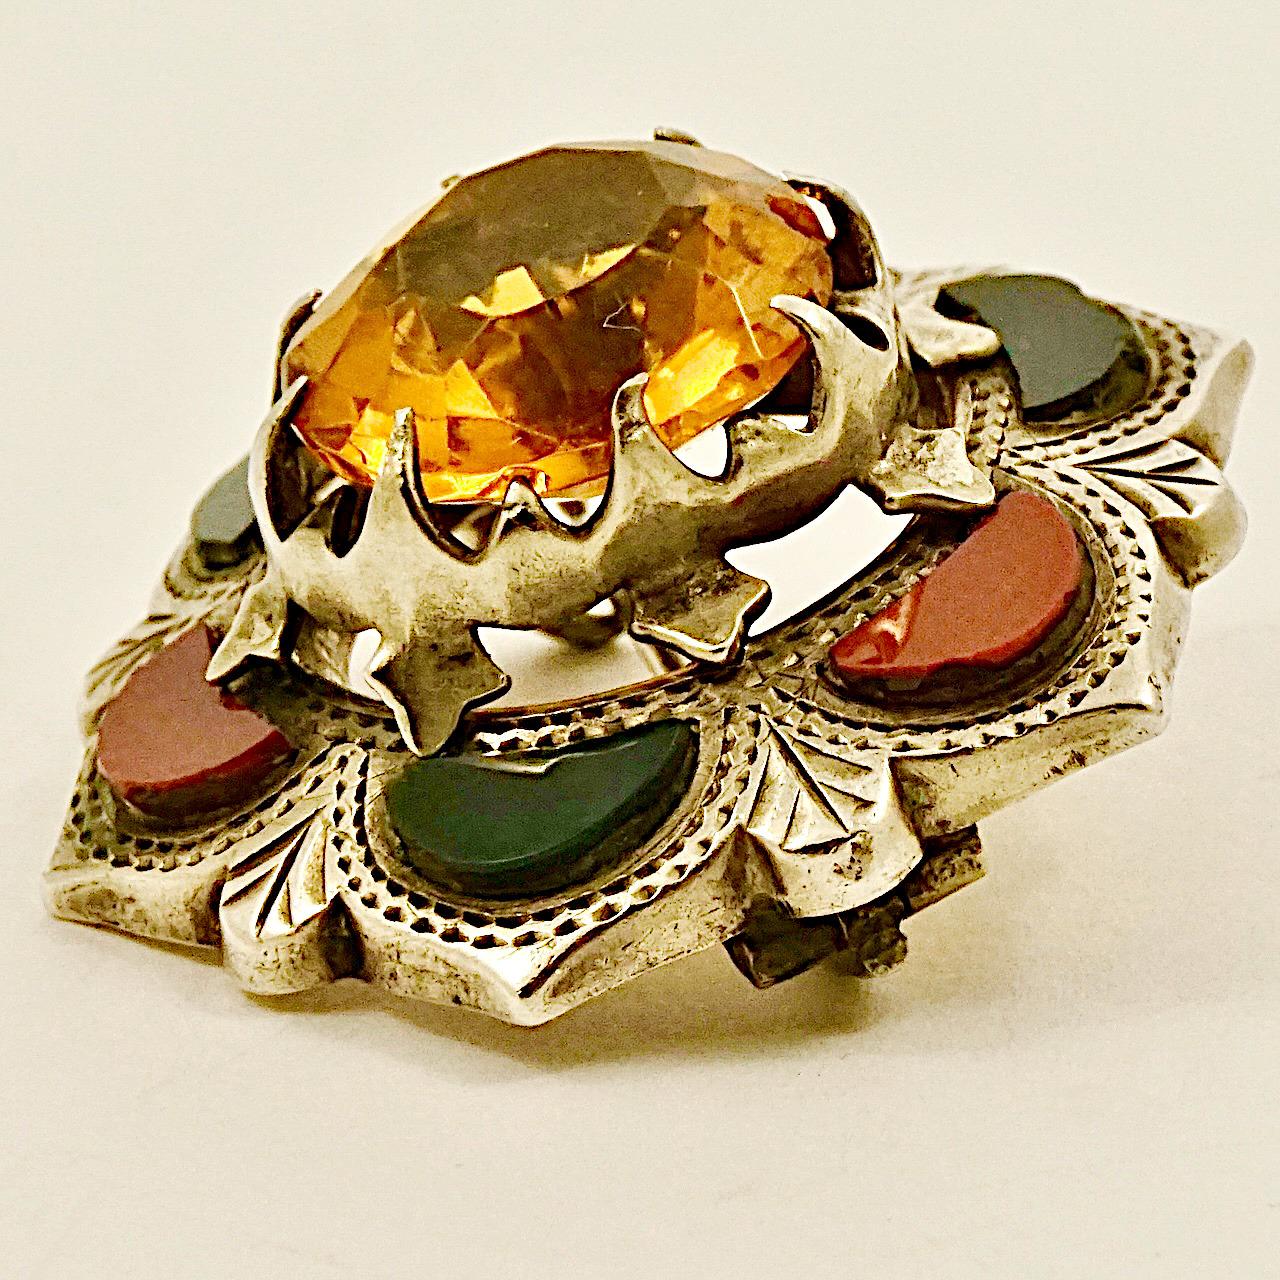 Wonderful antique Victorian silver hand engraved brooch with agates, and a lovely faceted faux citrine. The brooch tests for silver and has the old 